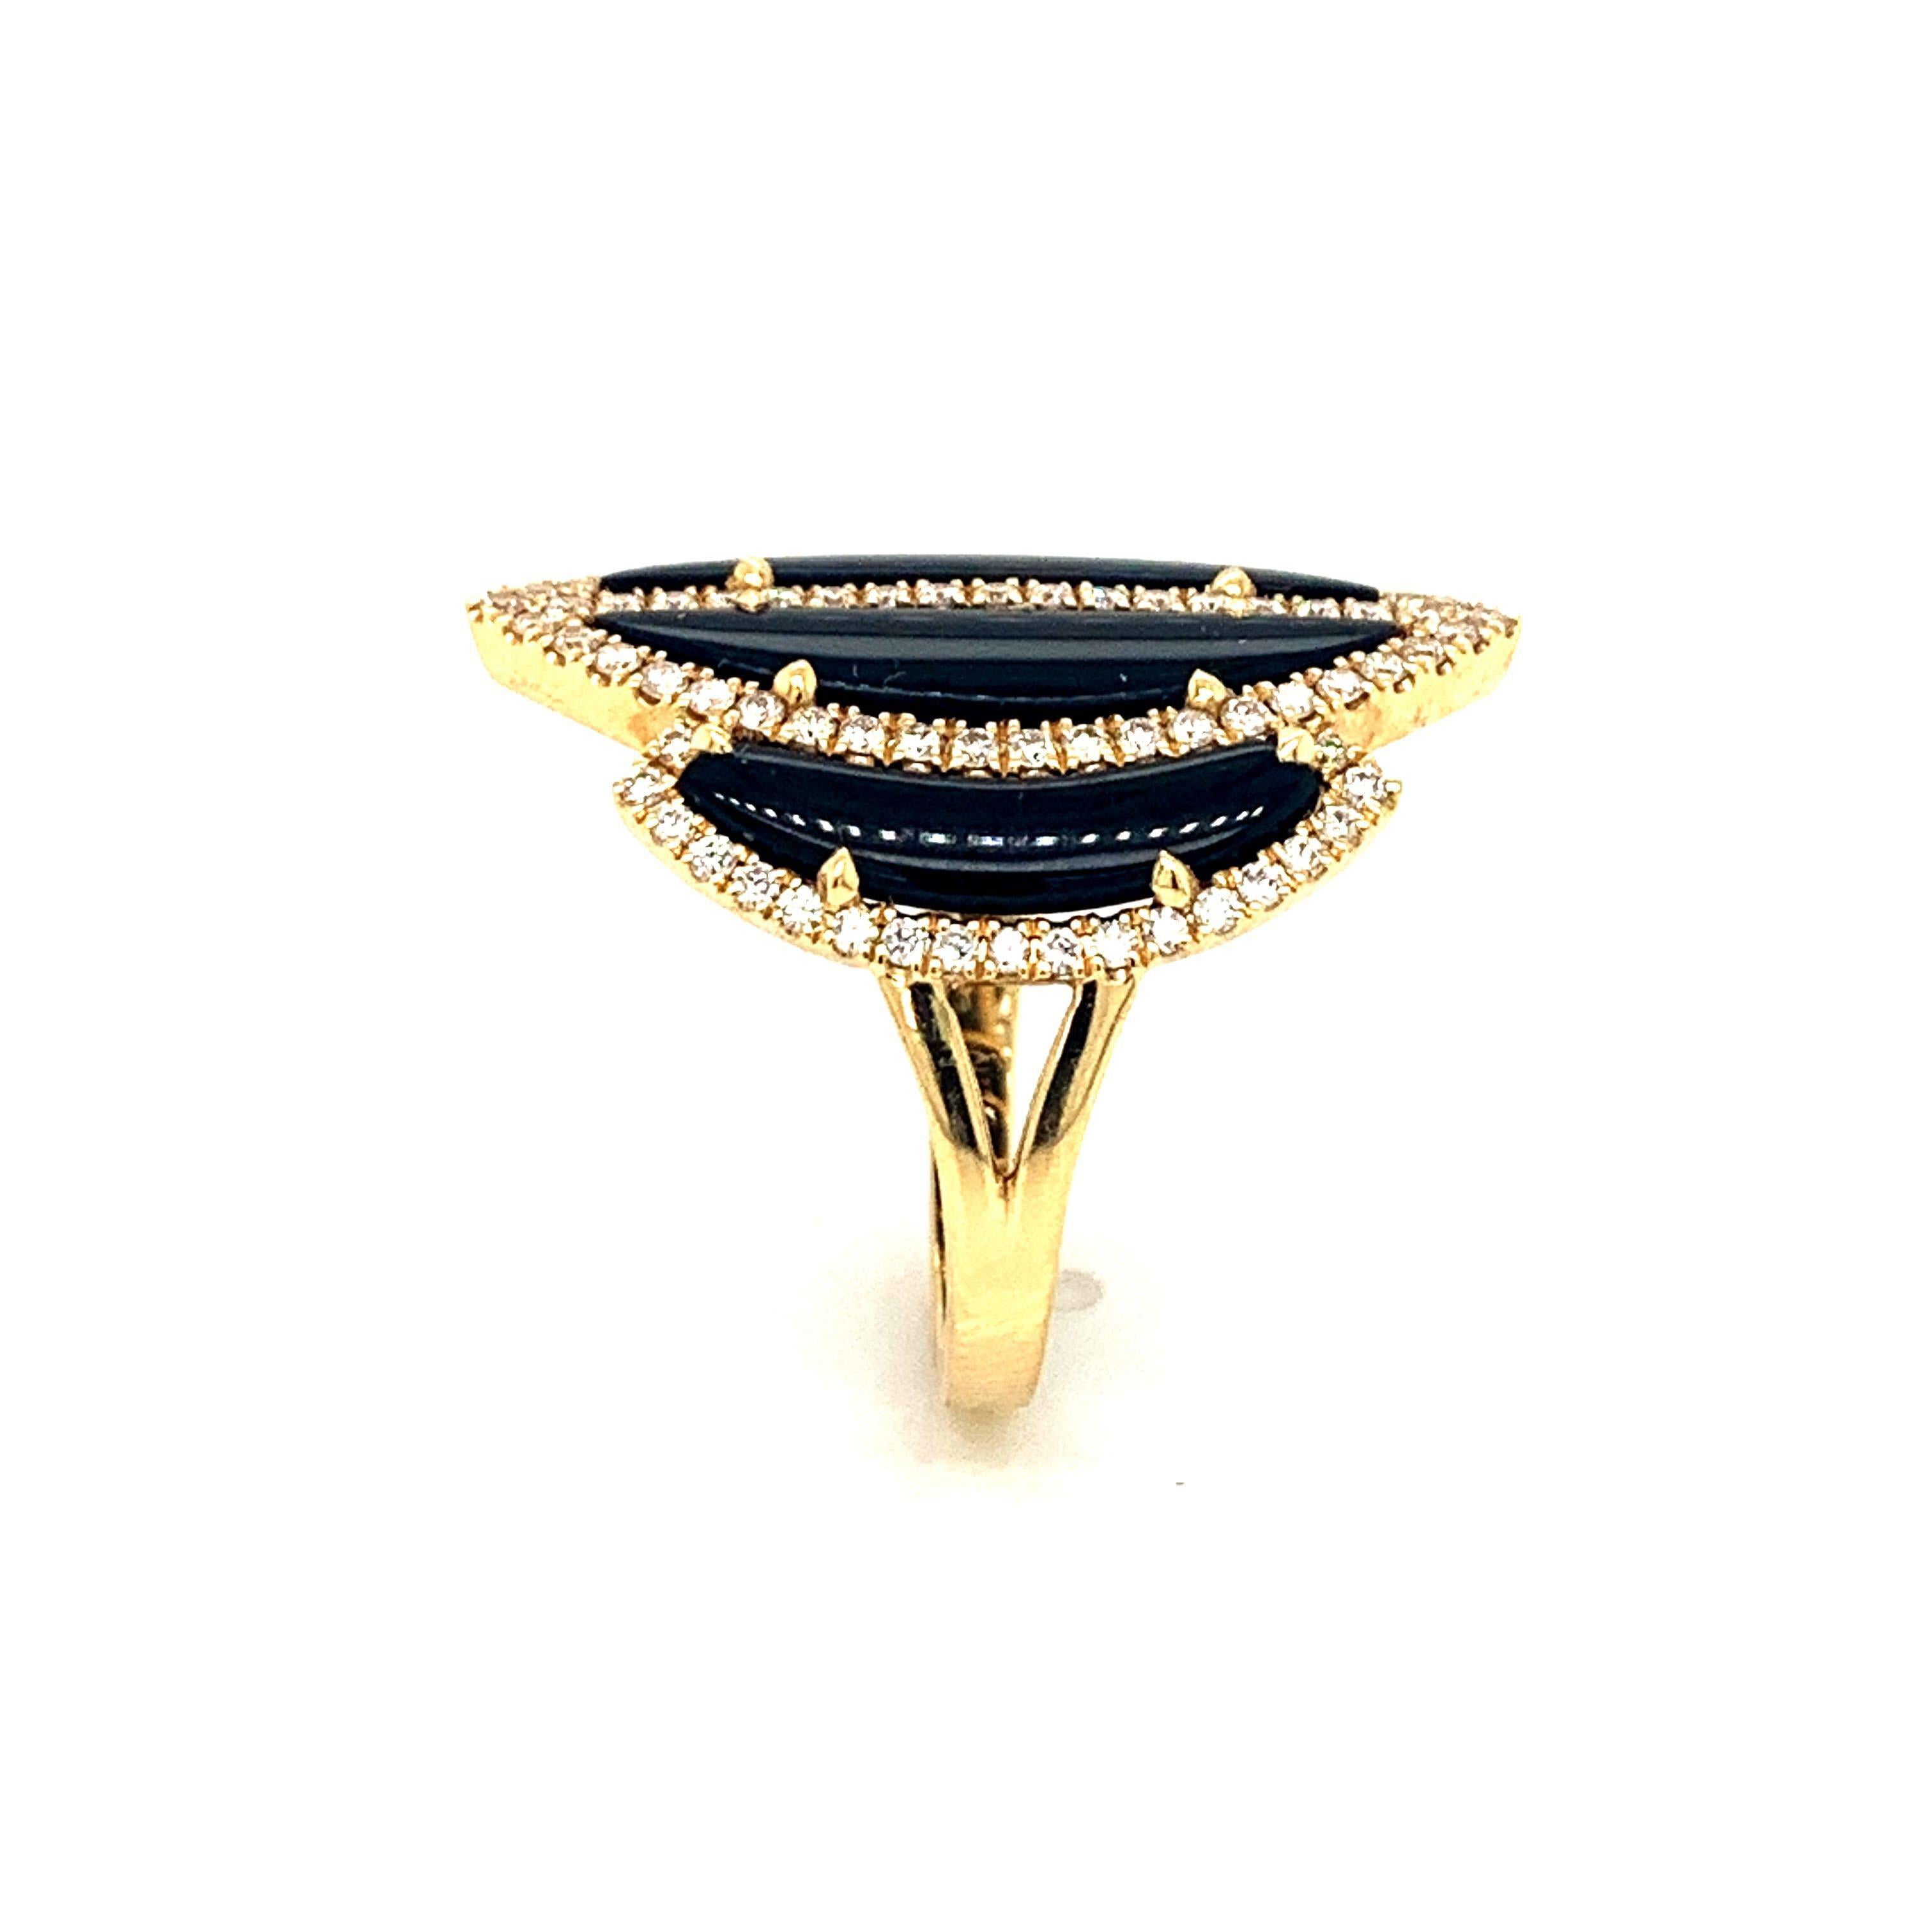 Women's 18 Karat Gold Art Deco Style Cocktail Ring with Cabochon Black Onyx & Diamonds For Sale